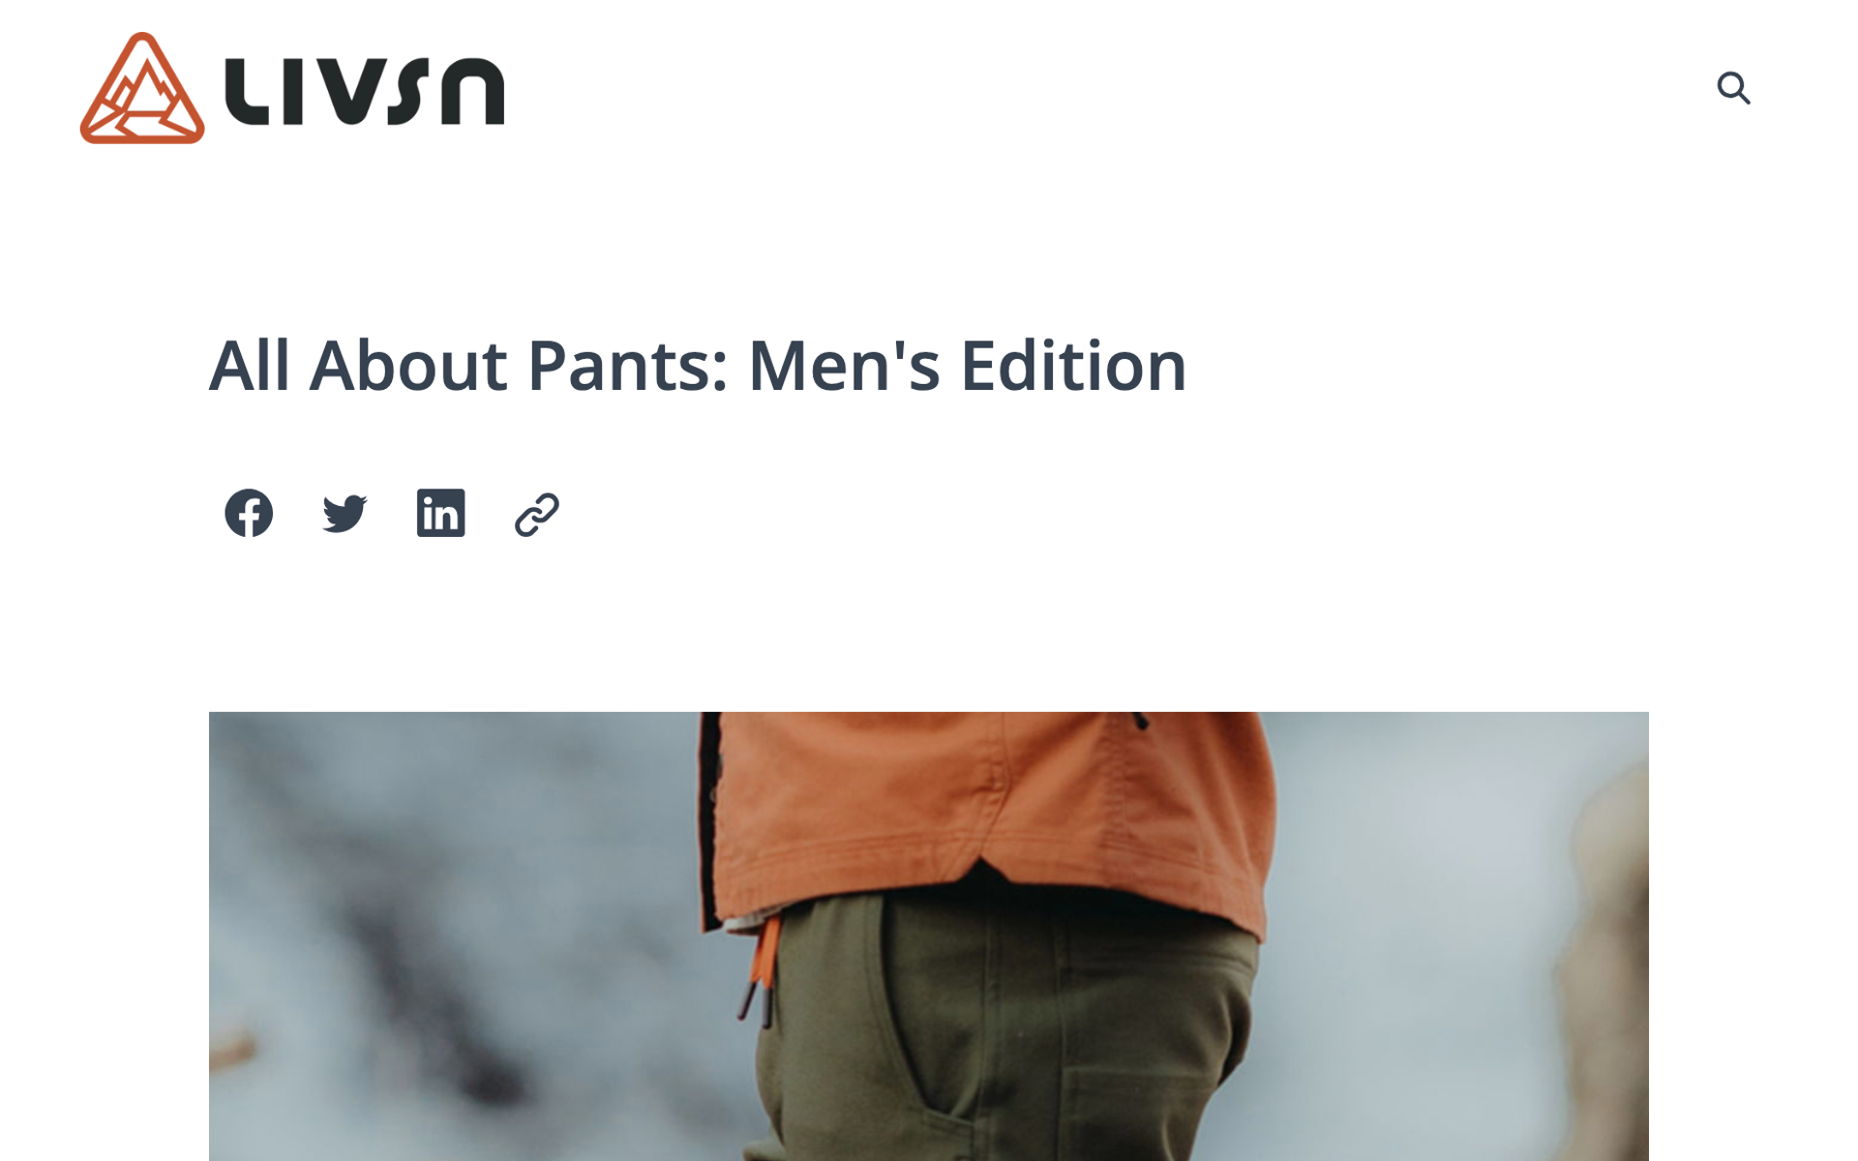 All About Pants: Men's Edition